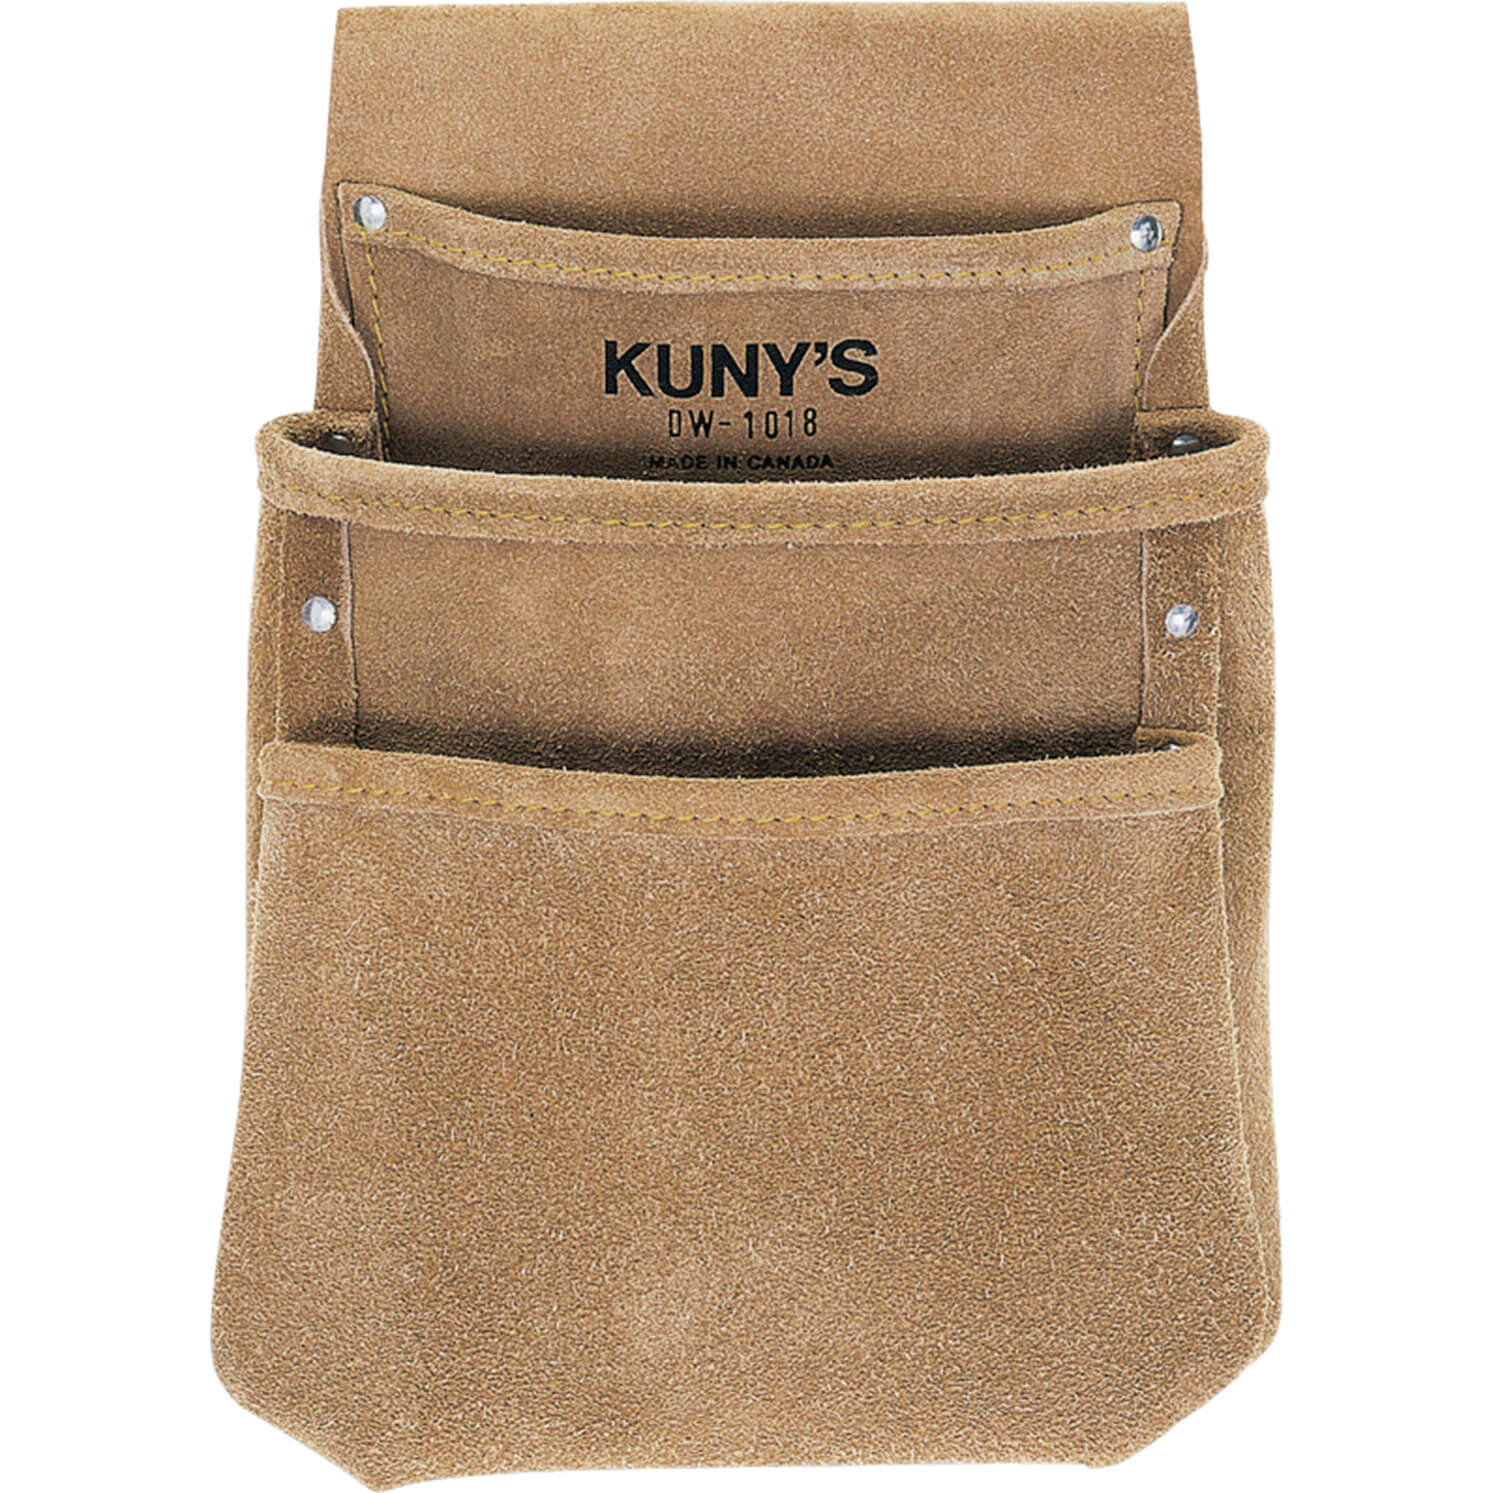 Image of Kunys 3 Pocket Split Grain Leather Drywall Pouch